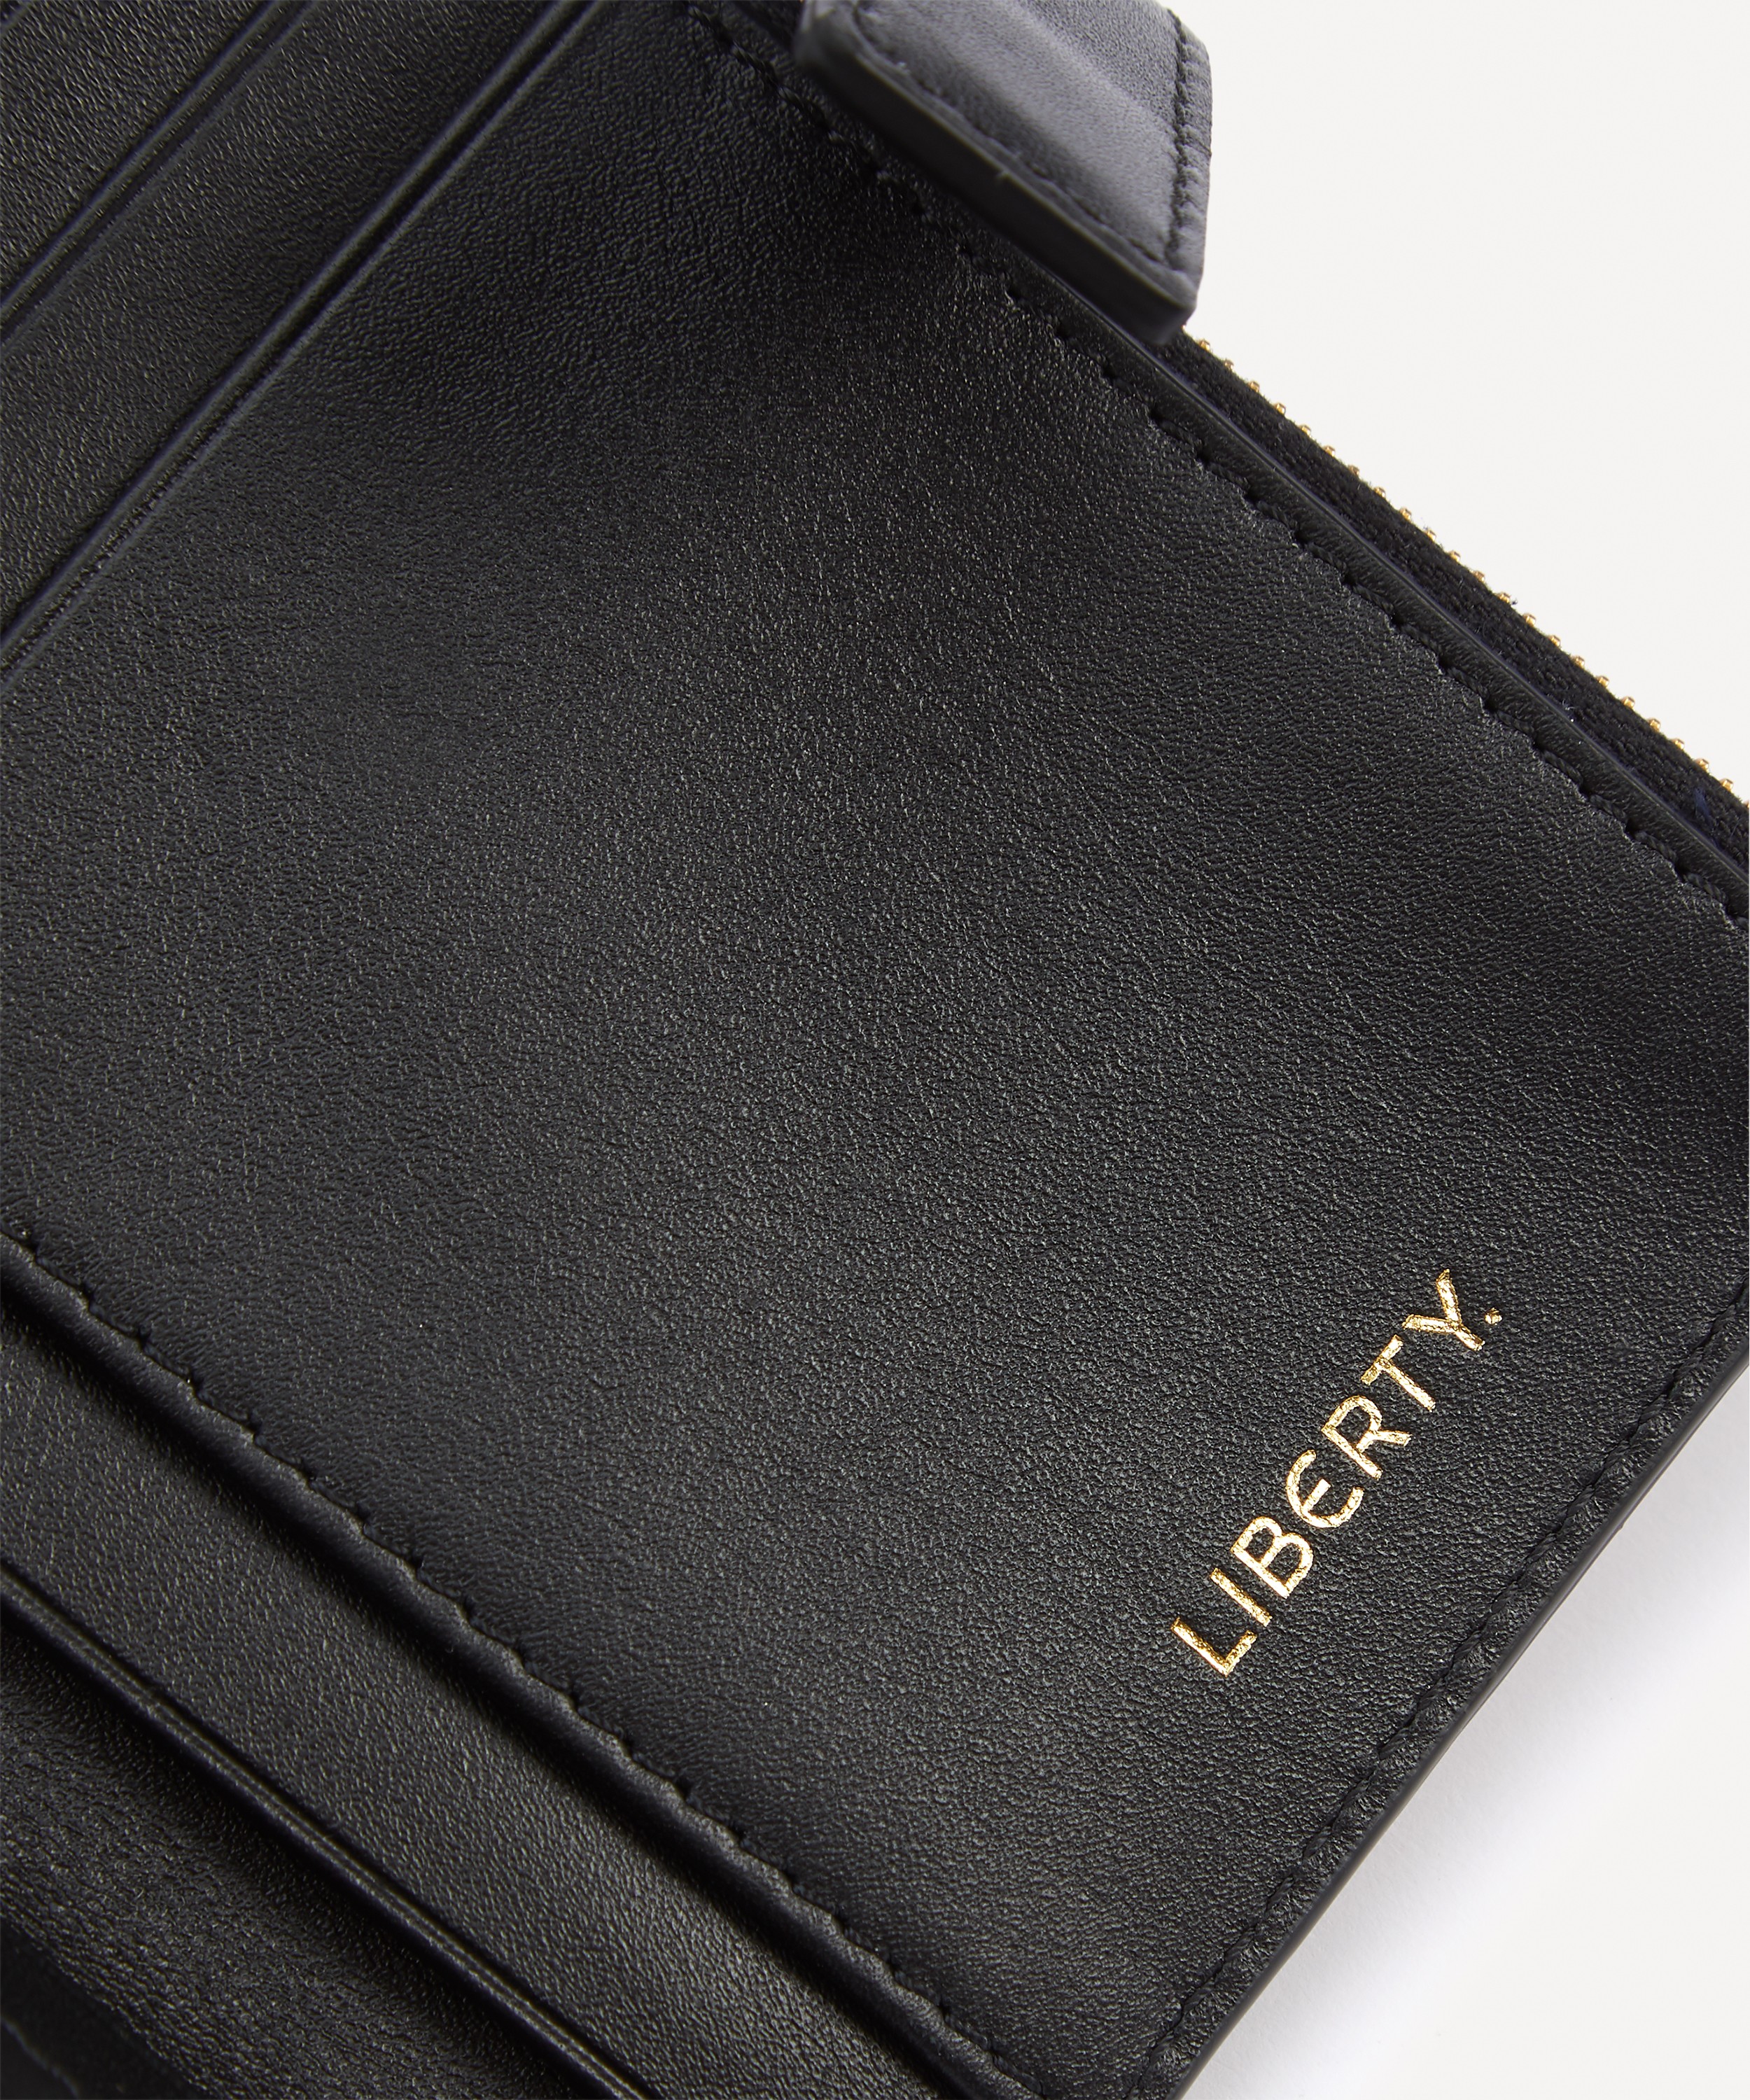 Liberty - Dawn Iphis Vertical Wallet image number 3